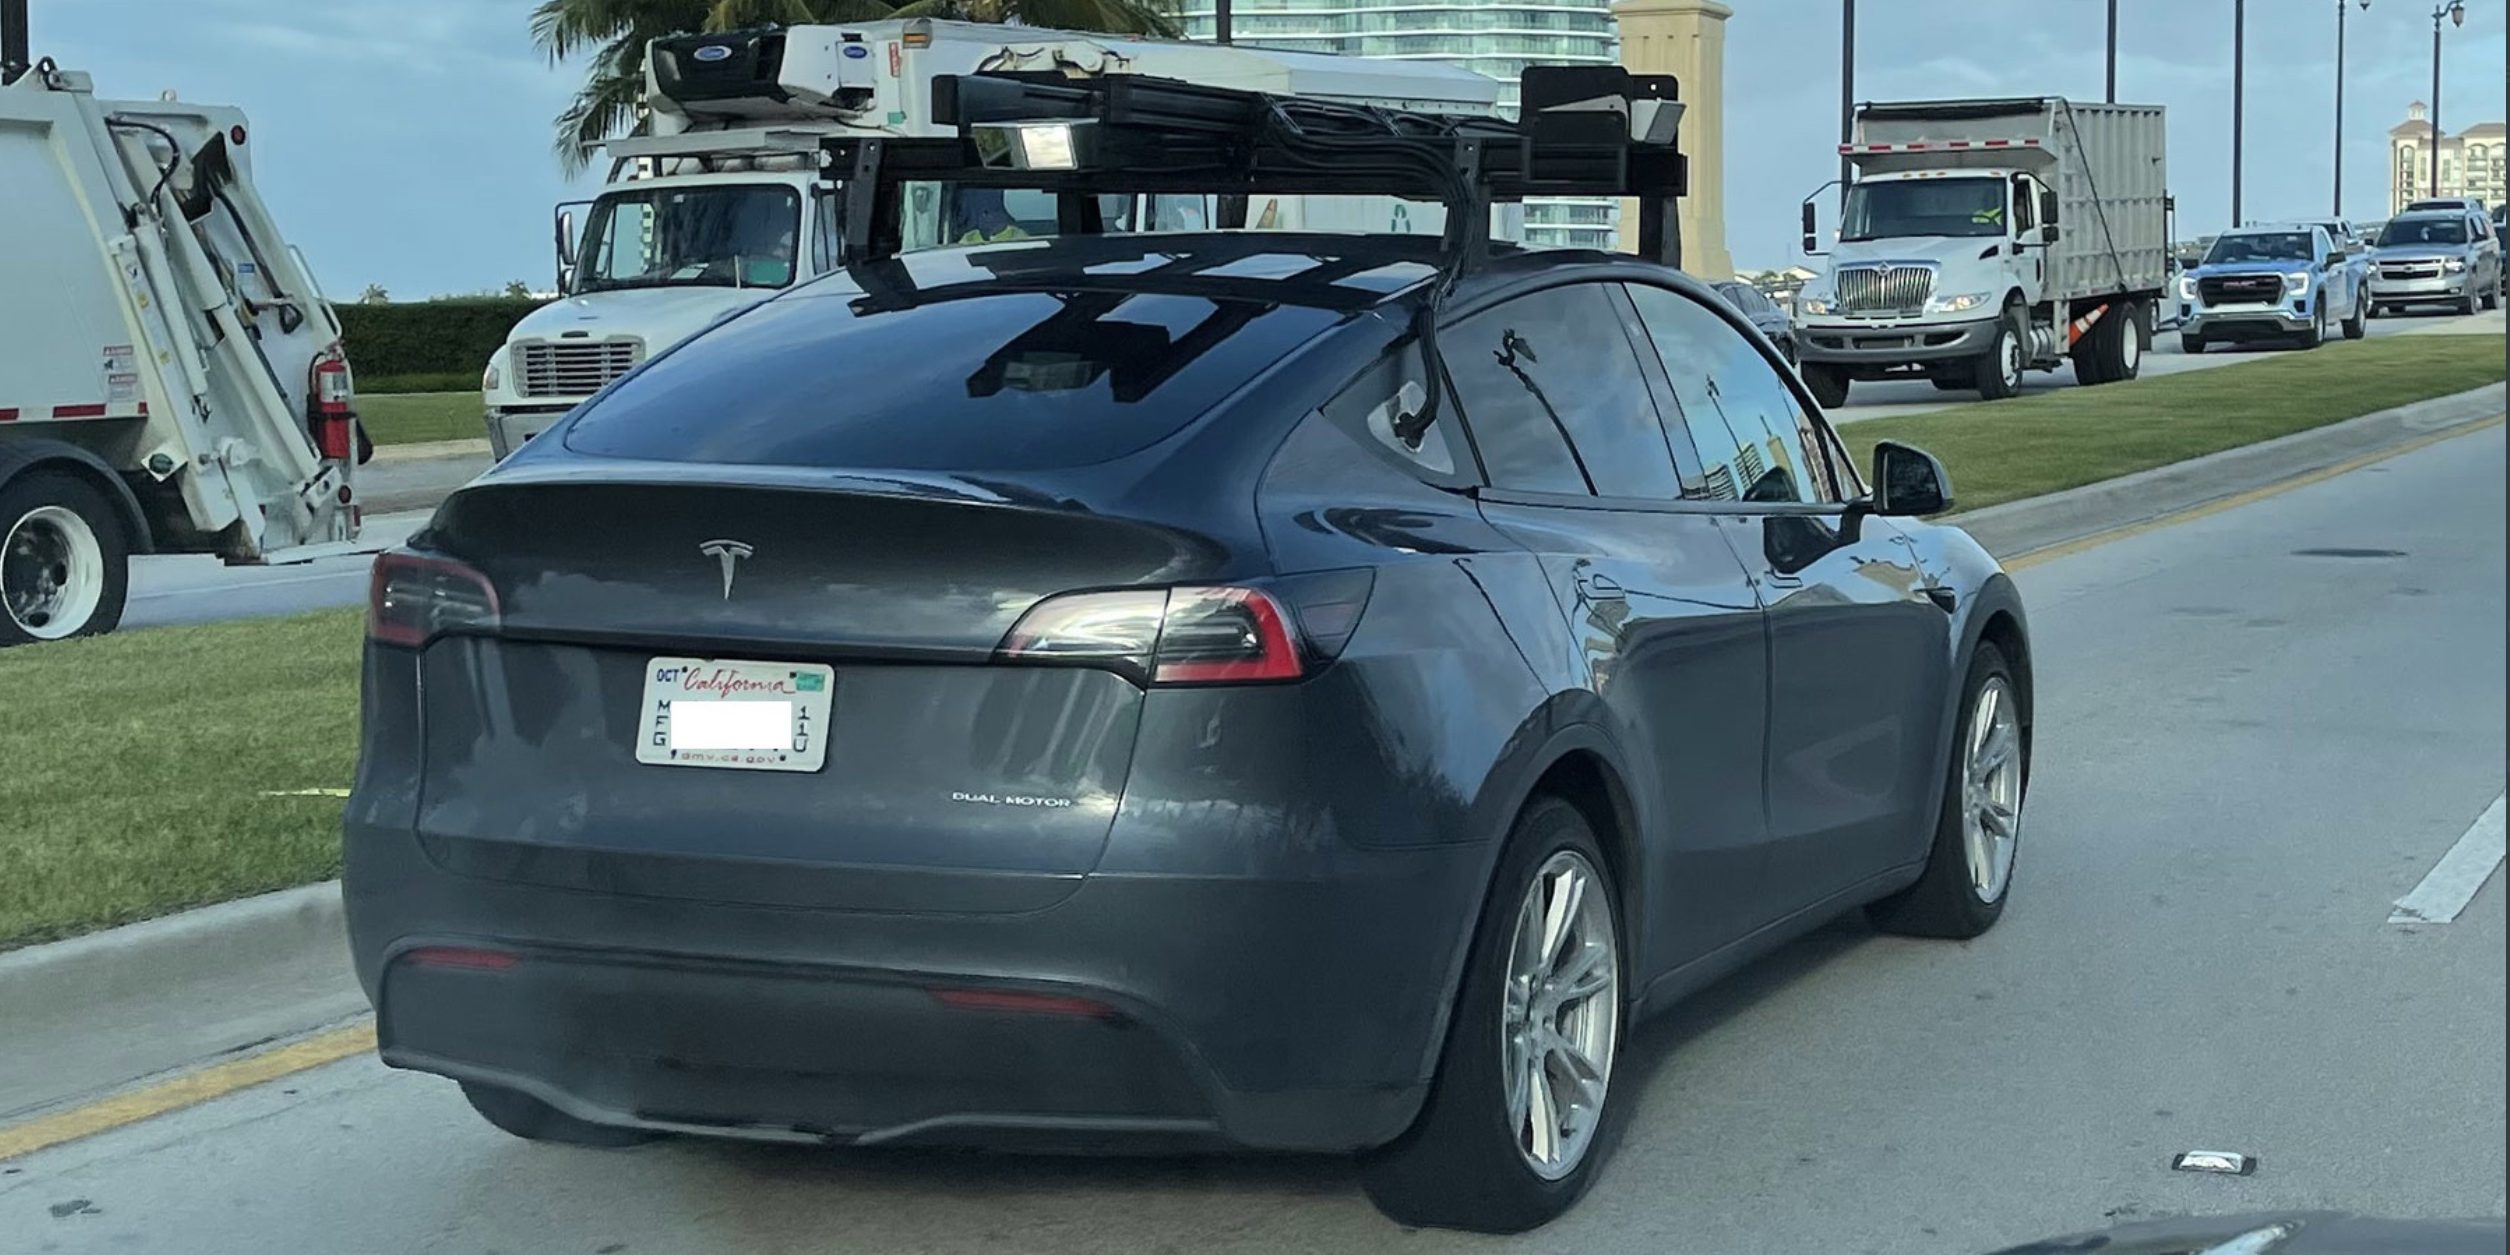 Tesla test vehicle spotted with lidar leads to rumors and confusion | Electrek